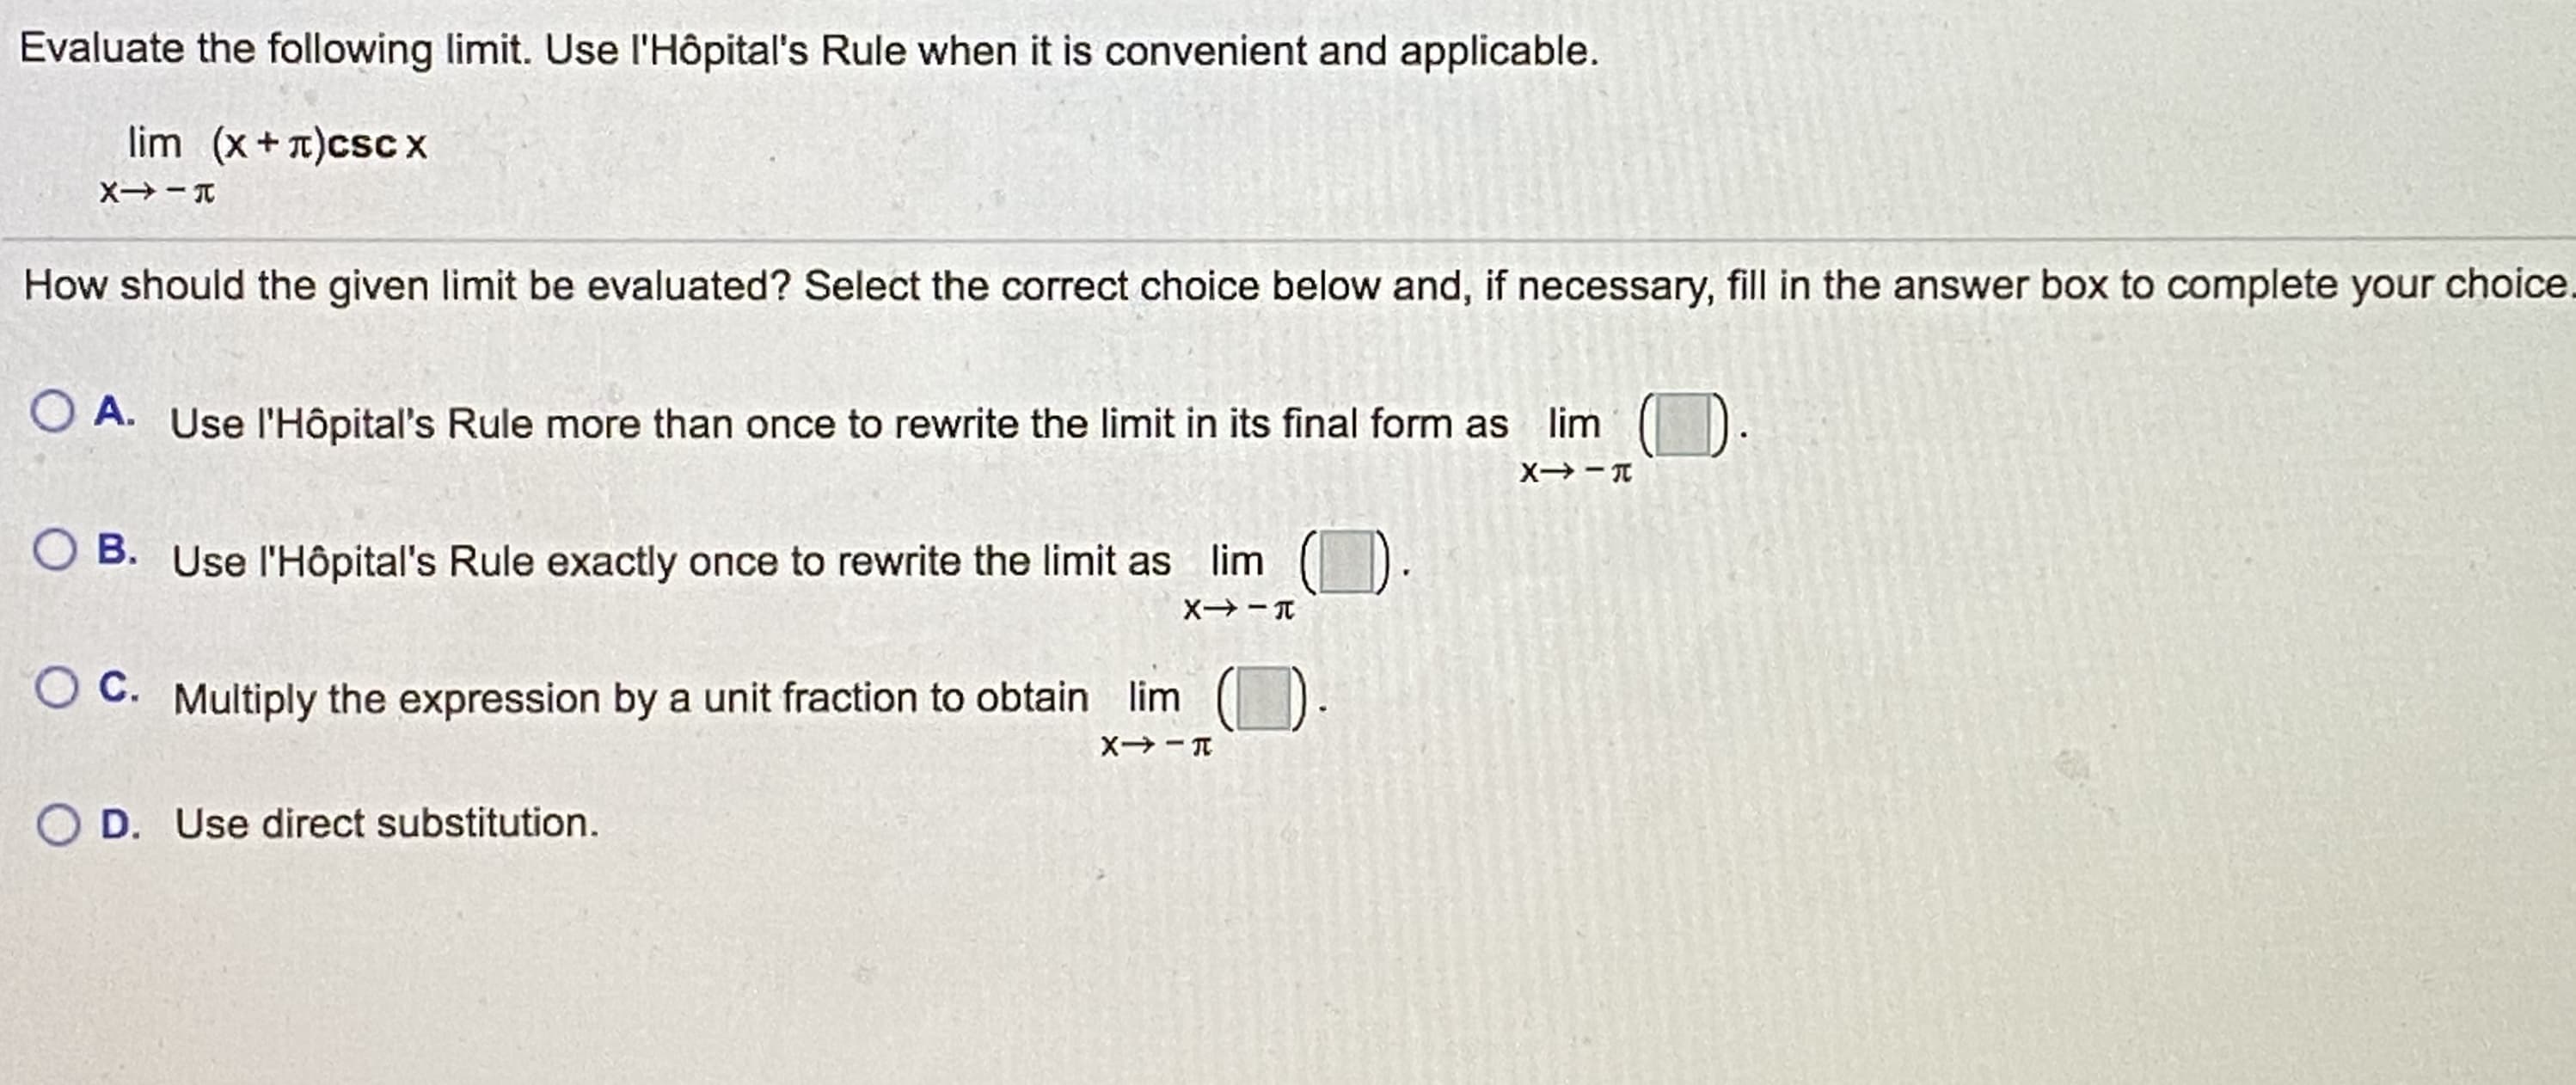 Evaluate the following limit. Use l'Hôpital's Rule when it is convenient and applicable.
lim (x+T)csc x
How should the given limit be evaluated? Select the correct choice below and, if necessary, fill in the answer box to complete your choice.
O A. Use l'Hôpital's Rule more than once to rewrite the limit in its final form as lim ().
O B. Use l'Hôpital's Rule exactly once to rewrite the limit as lim
O C. Multiply the expression by a unit fraction to obtain lim
O D. Use direct substitution.
